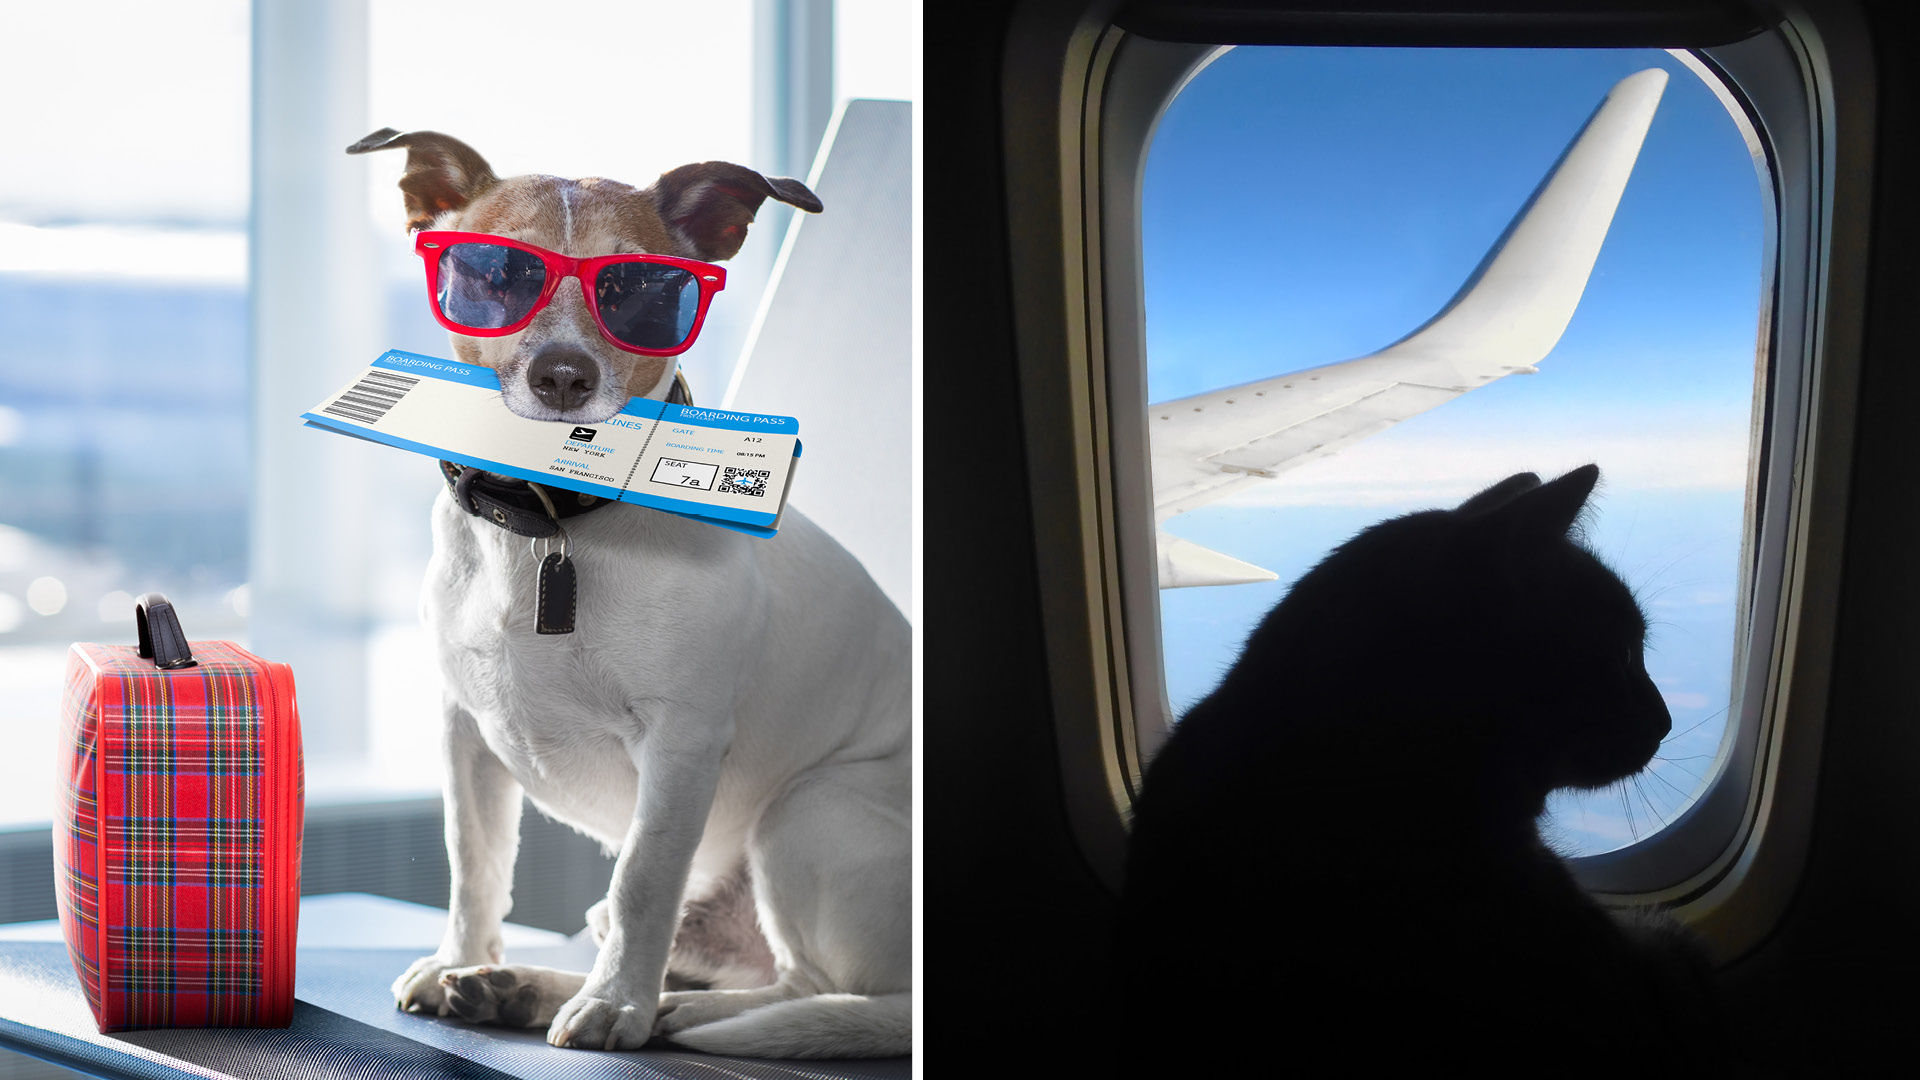 Private 'All-Pet' Jet Is Here To Rescue & Transport Stranded Pets From